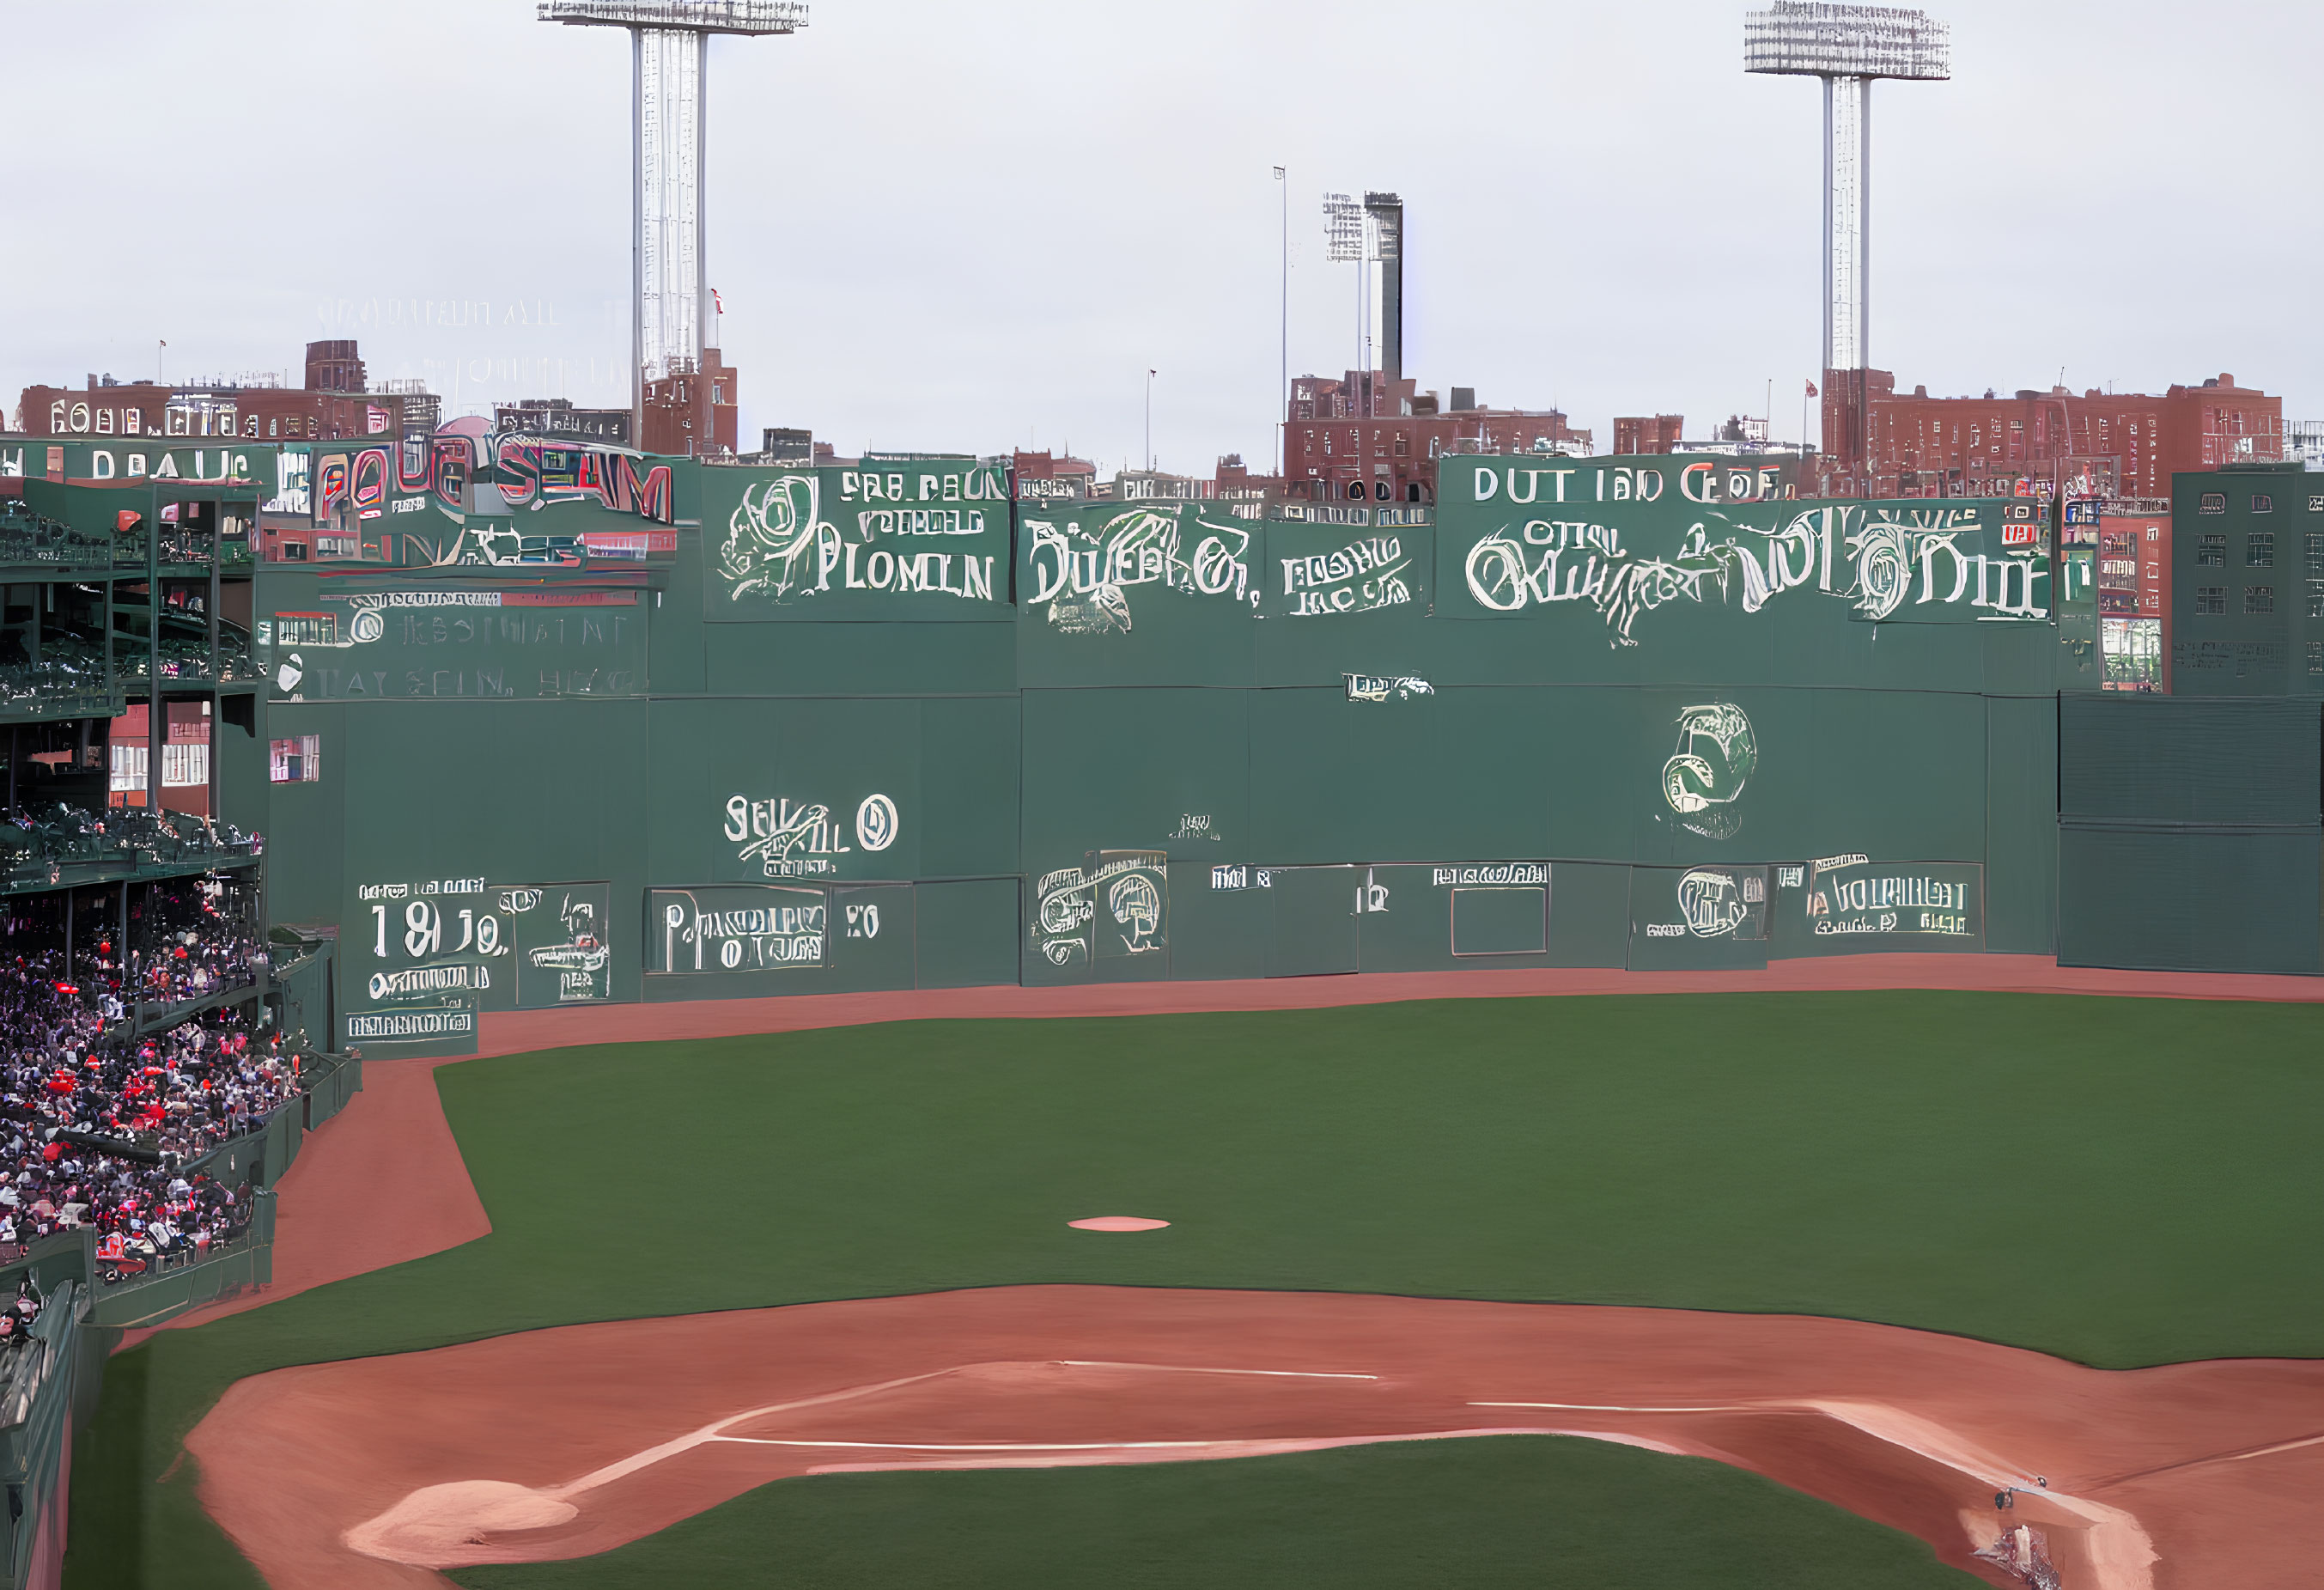 Iconic Green Monster Wall at Fenway Park with Daytime Baseball Game Action